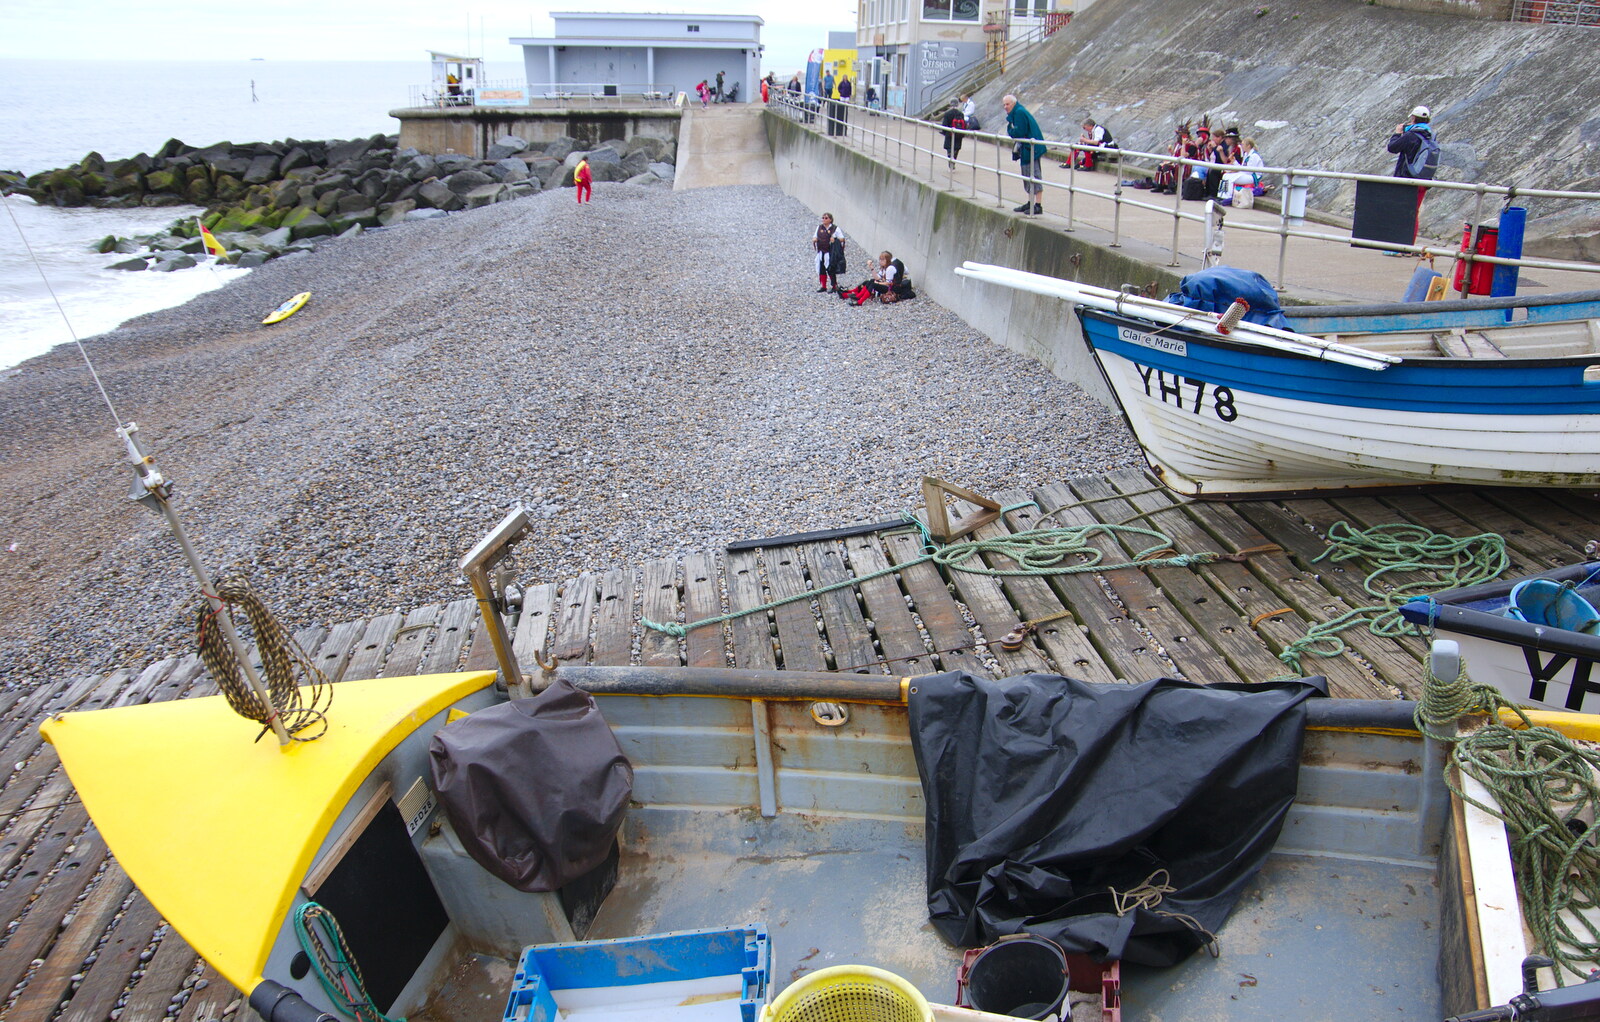 Fishing boats on the beach from Kelling Camping and the Potty Morris Festival, Sheringham, North Norfolk - 6th July 2019